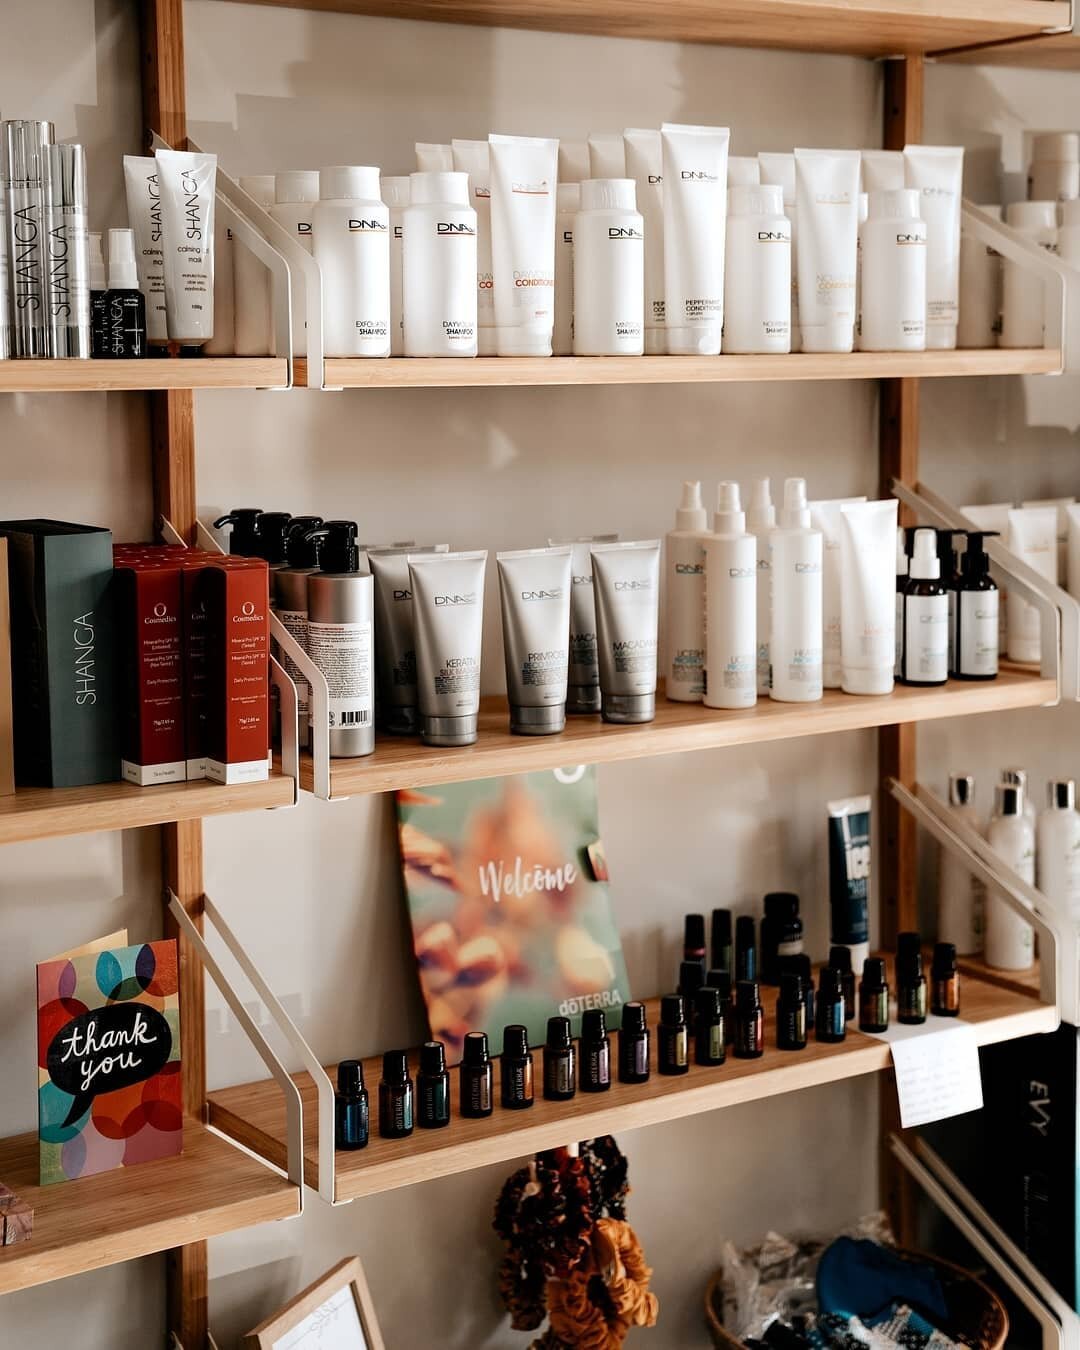 We proudly stock a range of vegan, organic and holistic beauty and hair products that enrich your life and make you feel like a million bucks.&nbsp;😍

Some of the brands we stock (and swear by):
​🍃&nbsp;@dnaorganics haircare range
​🍃&nbsp;@shangab